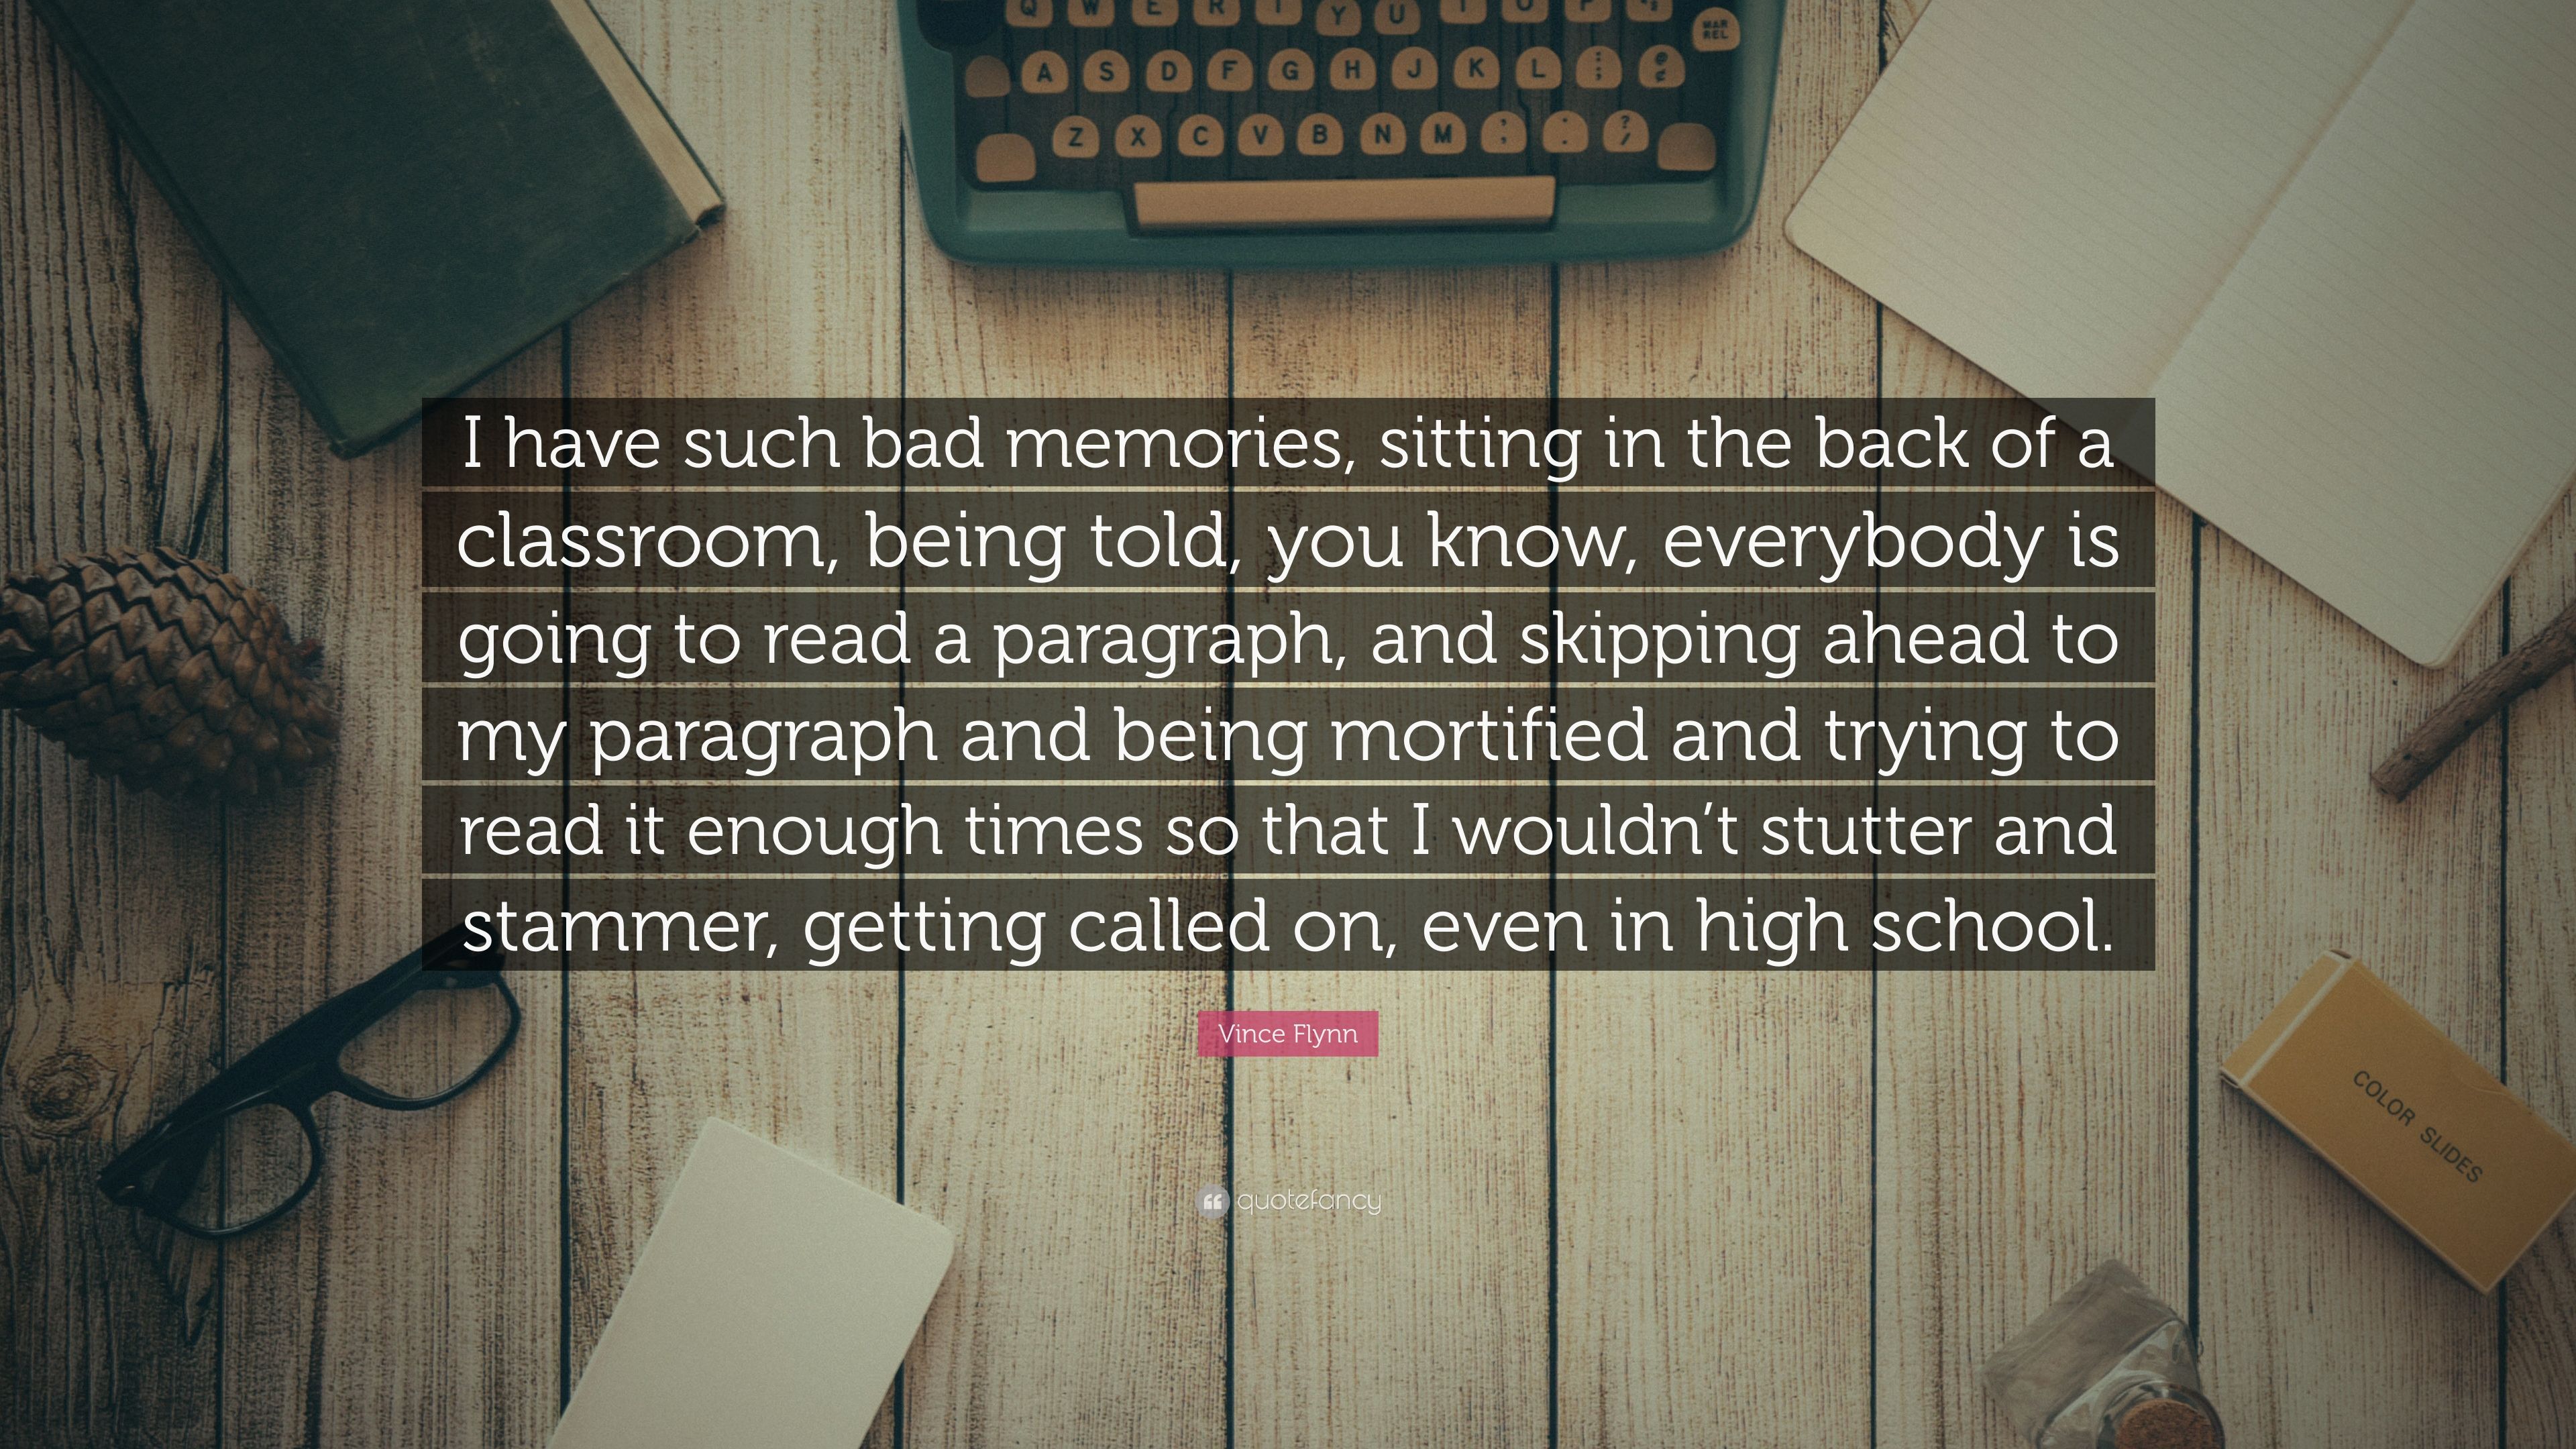 Vince Flynn Quote: “I have such bad memories, sitting in